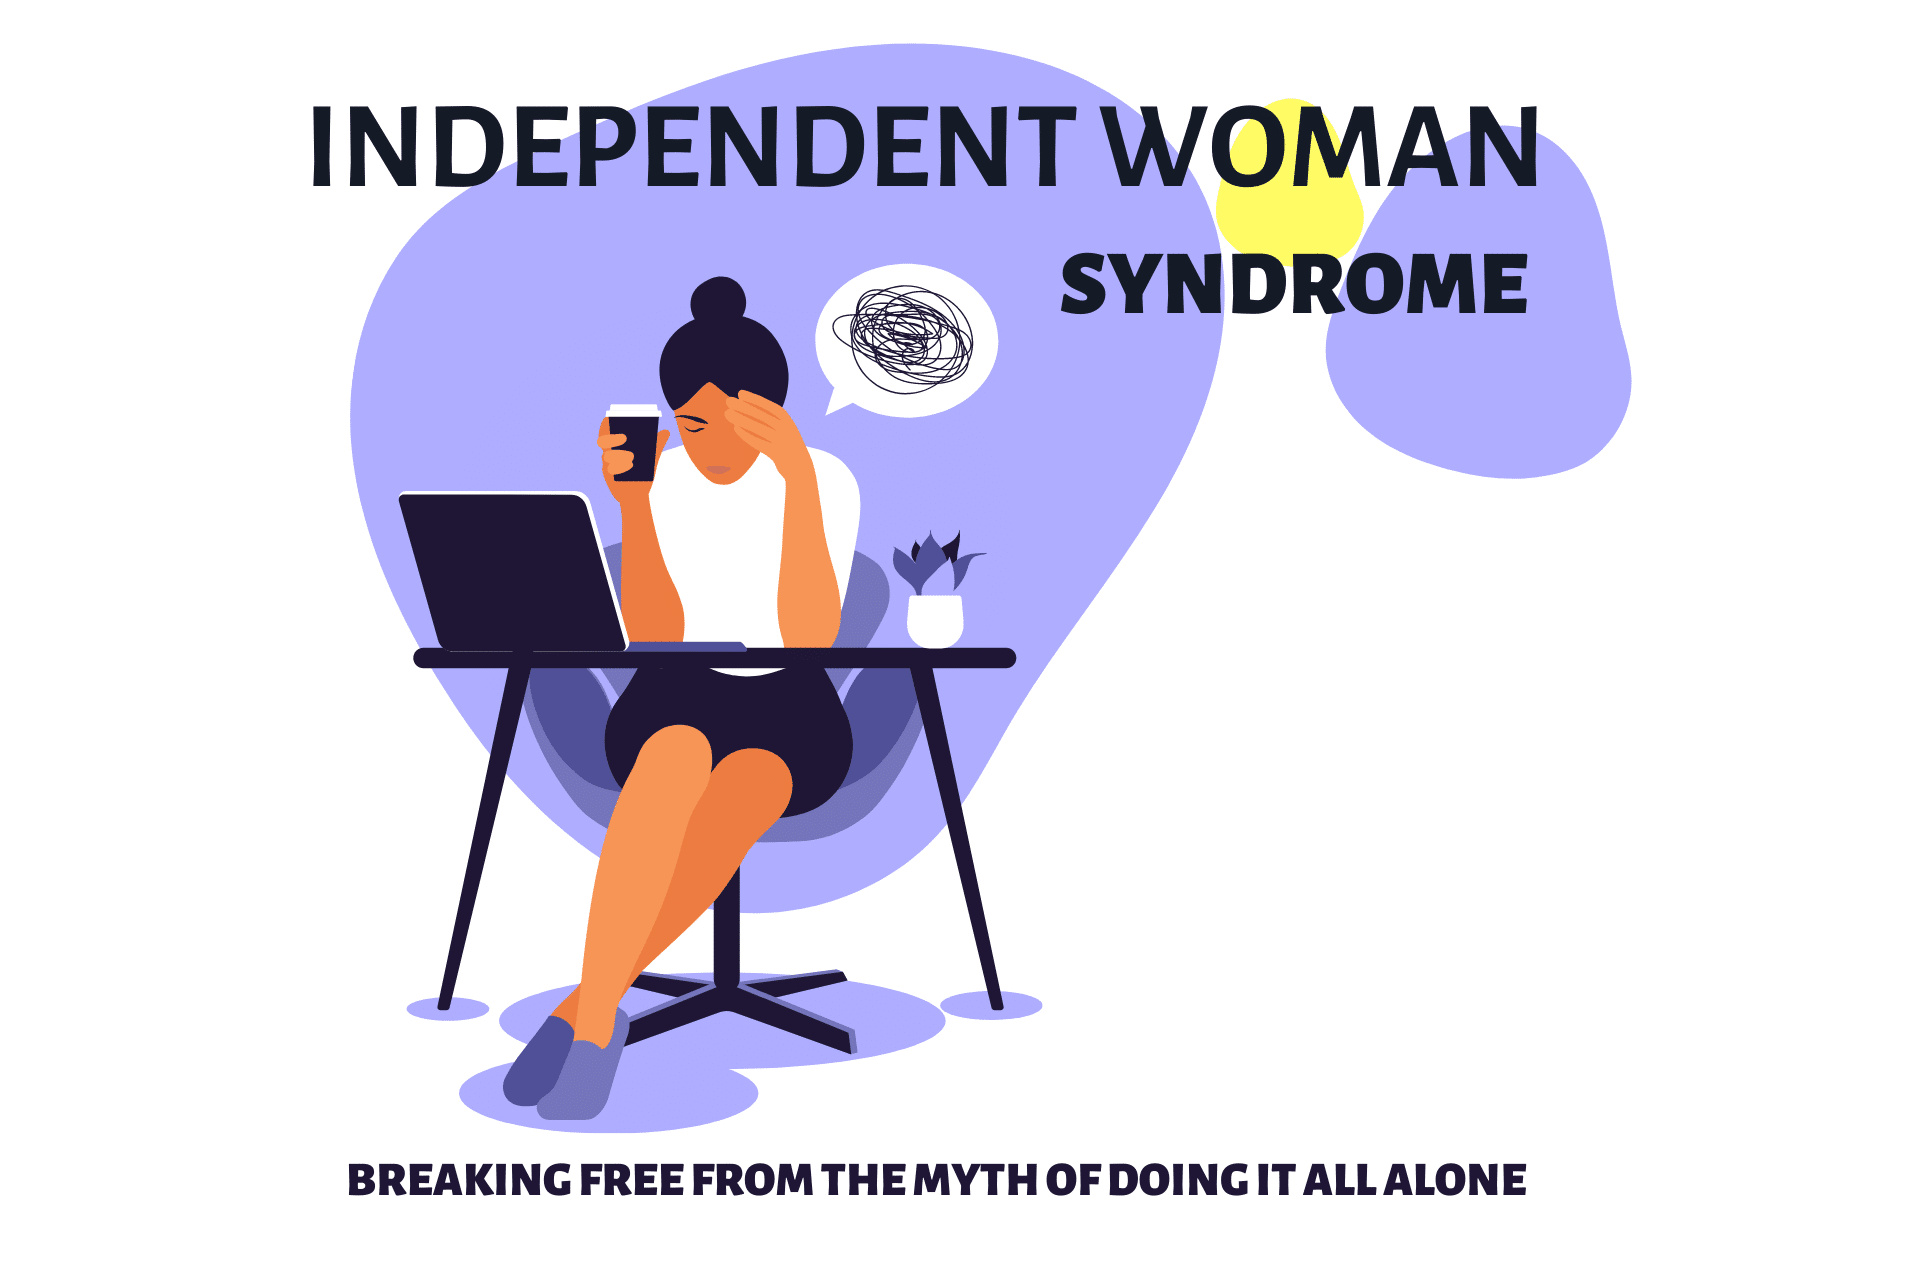 Independent woman syndrome